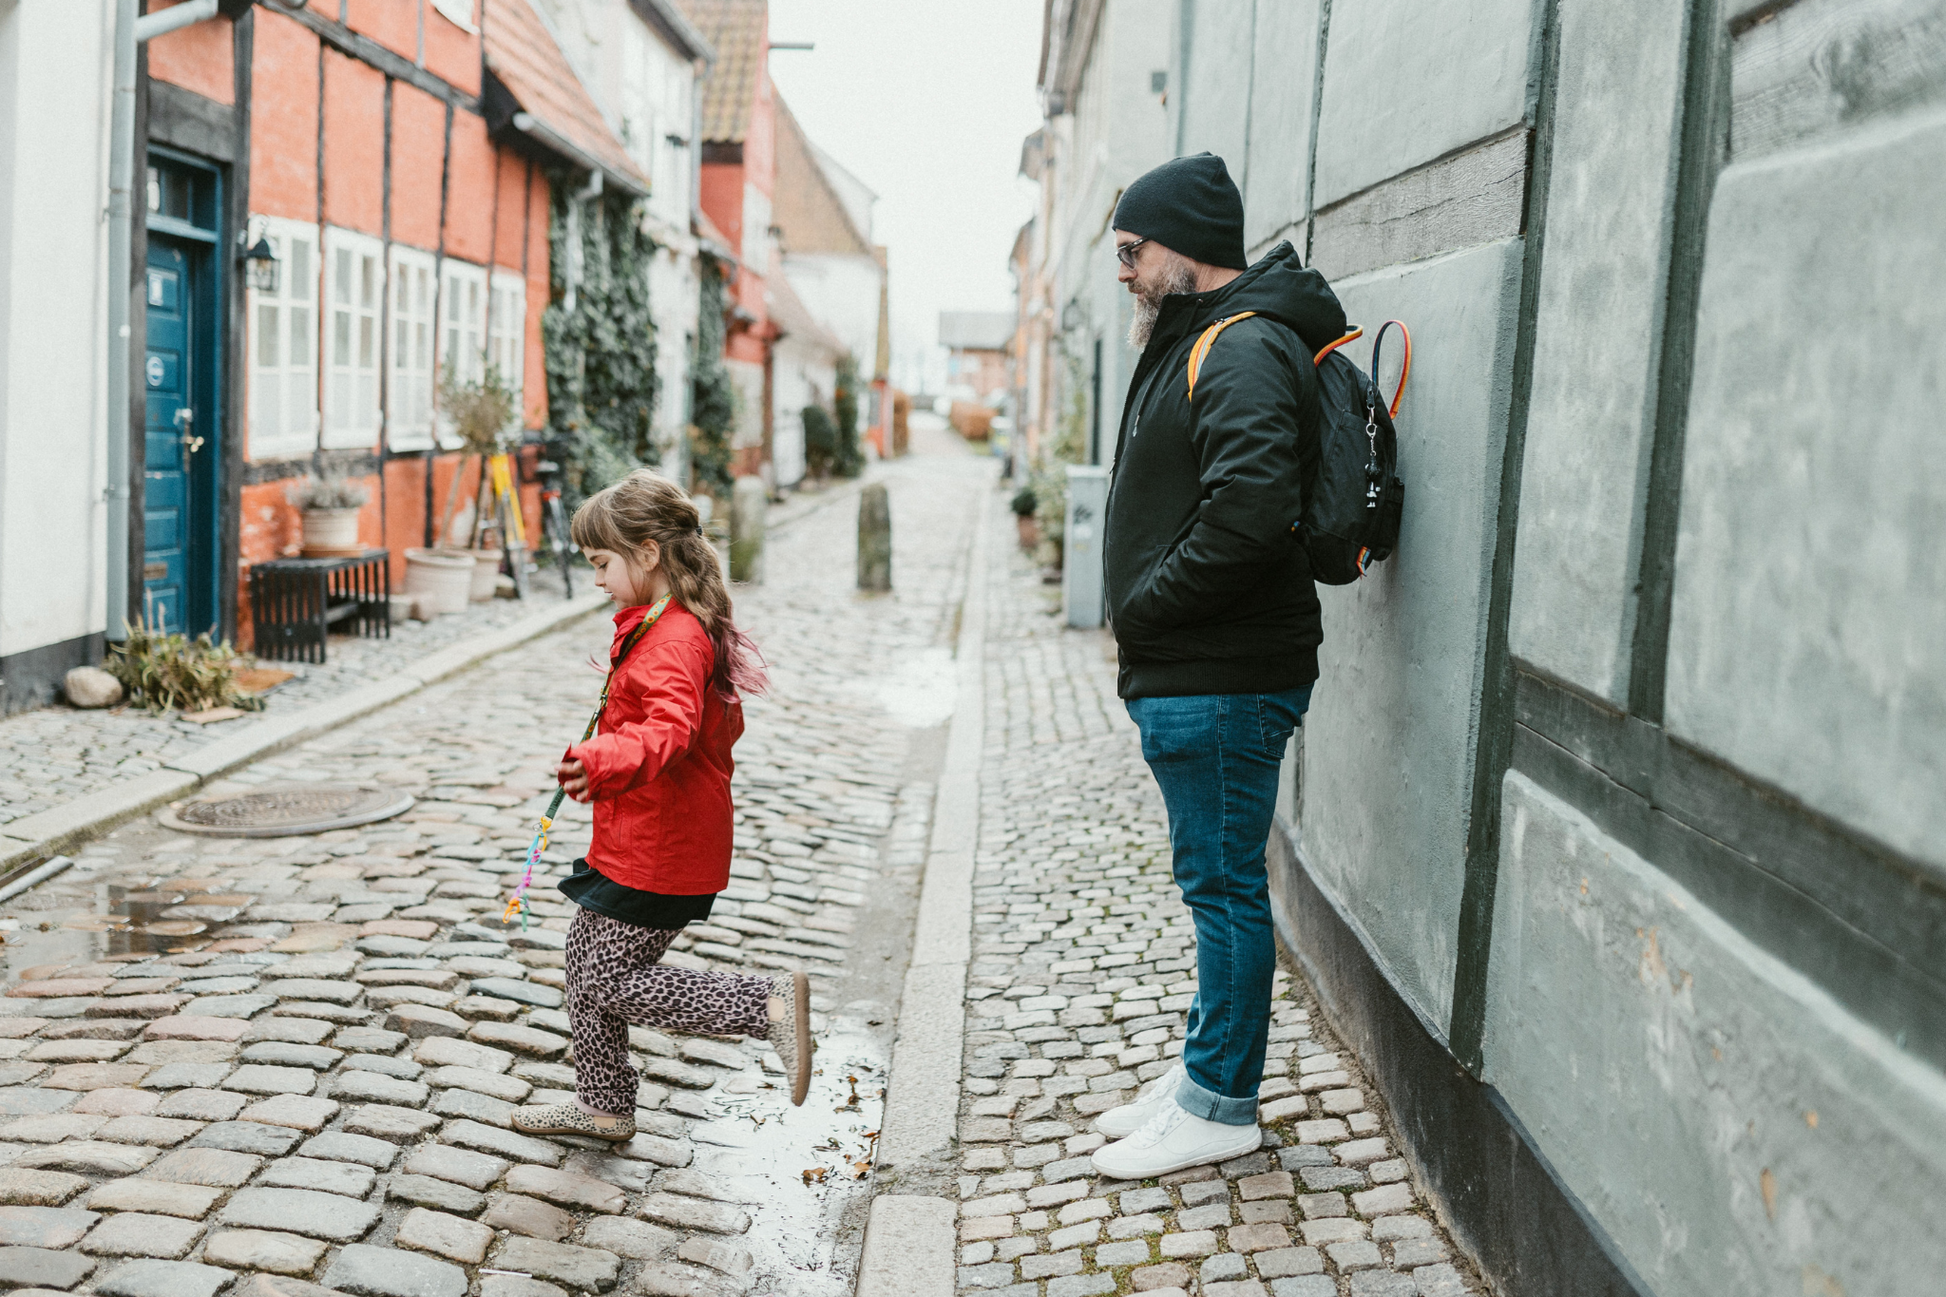 DAD AND DAUGHTER IN DENMARK